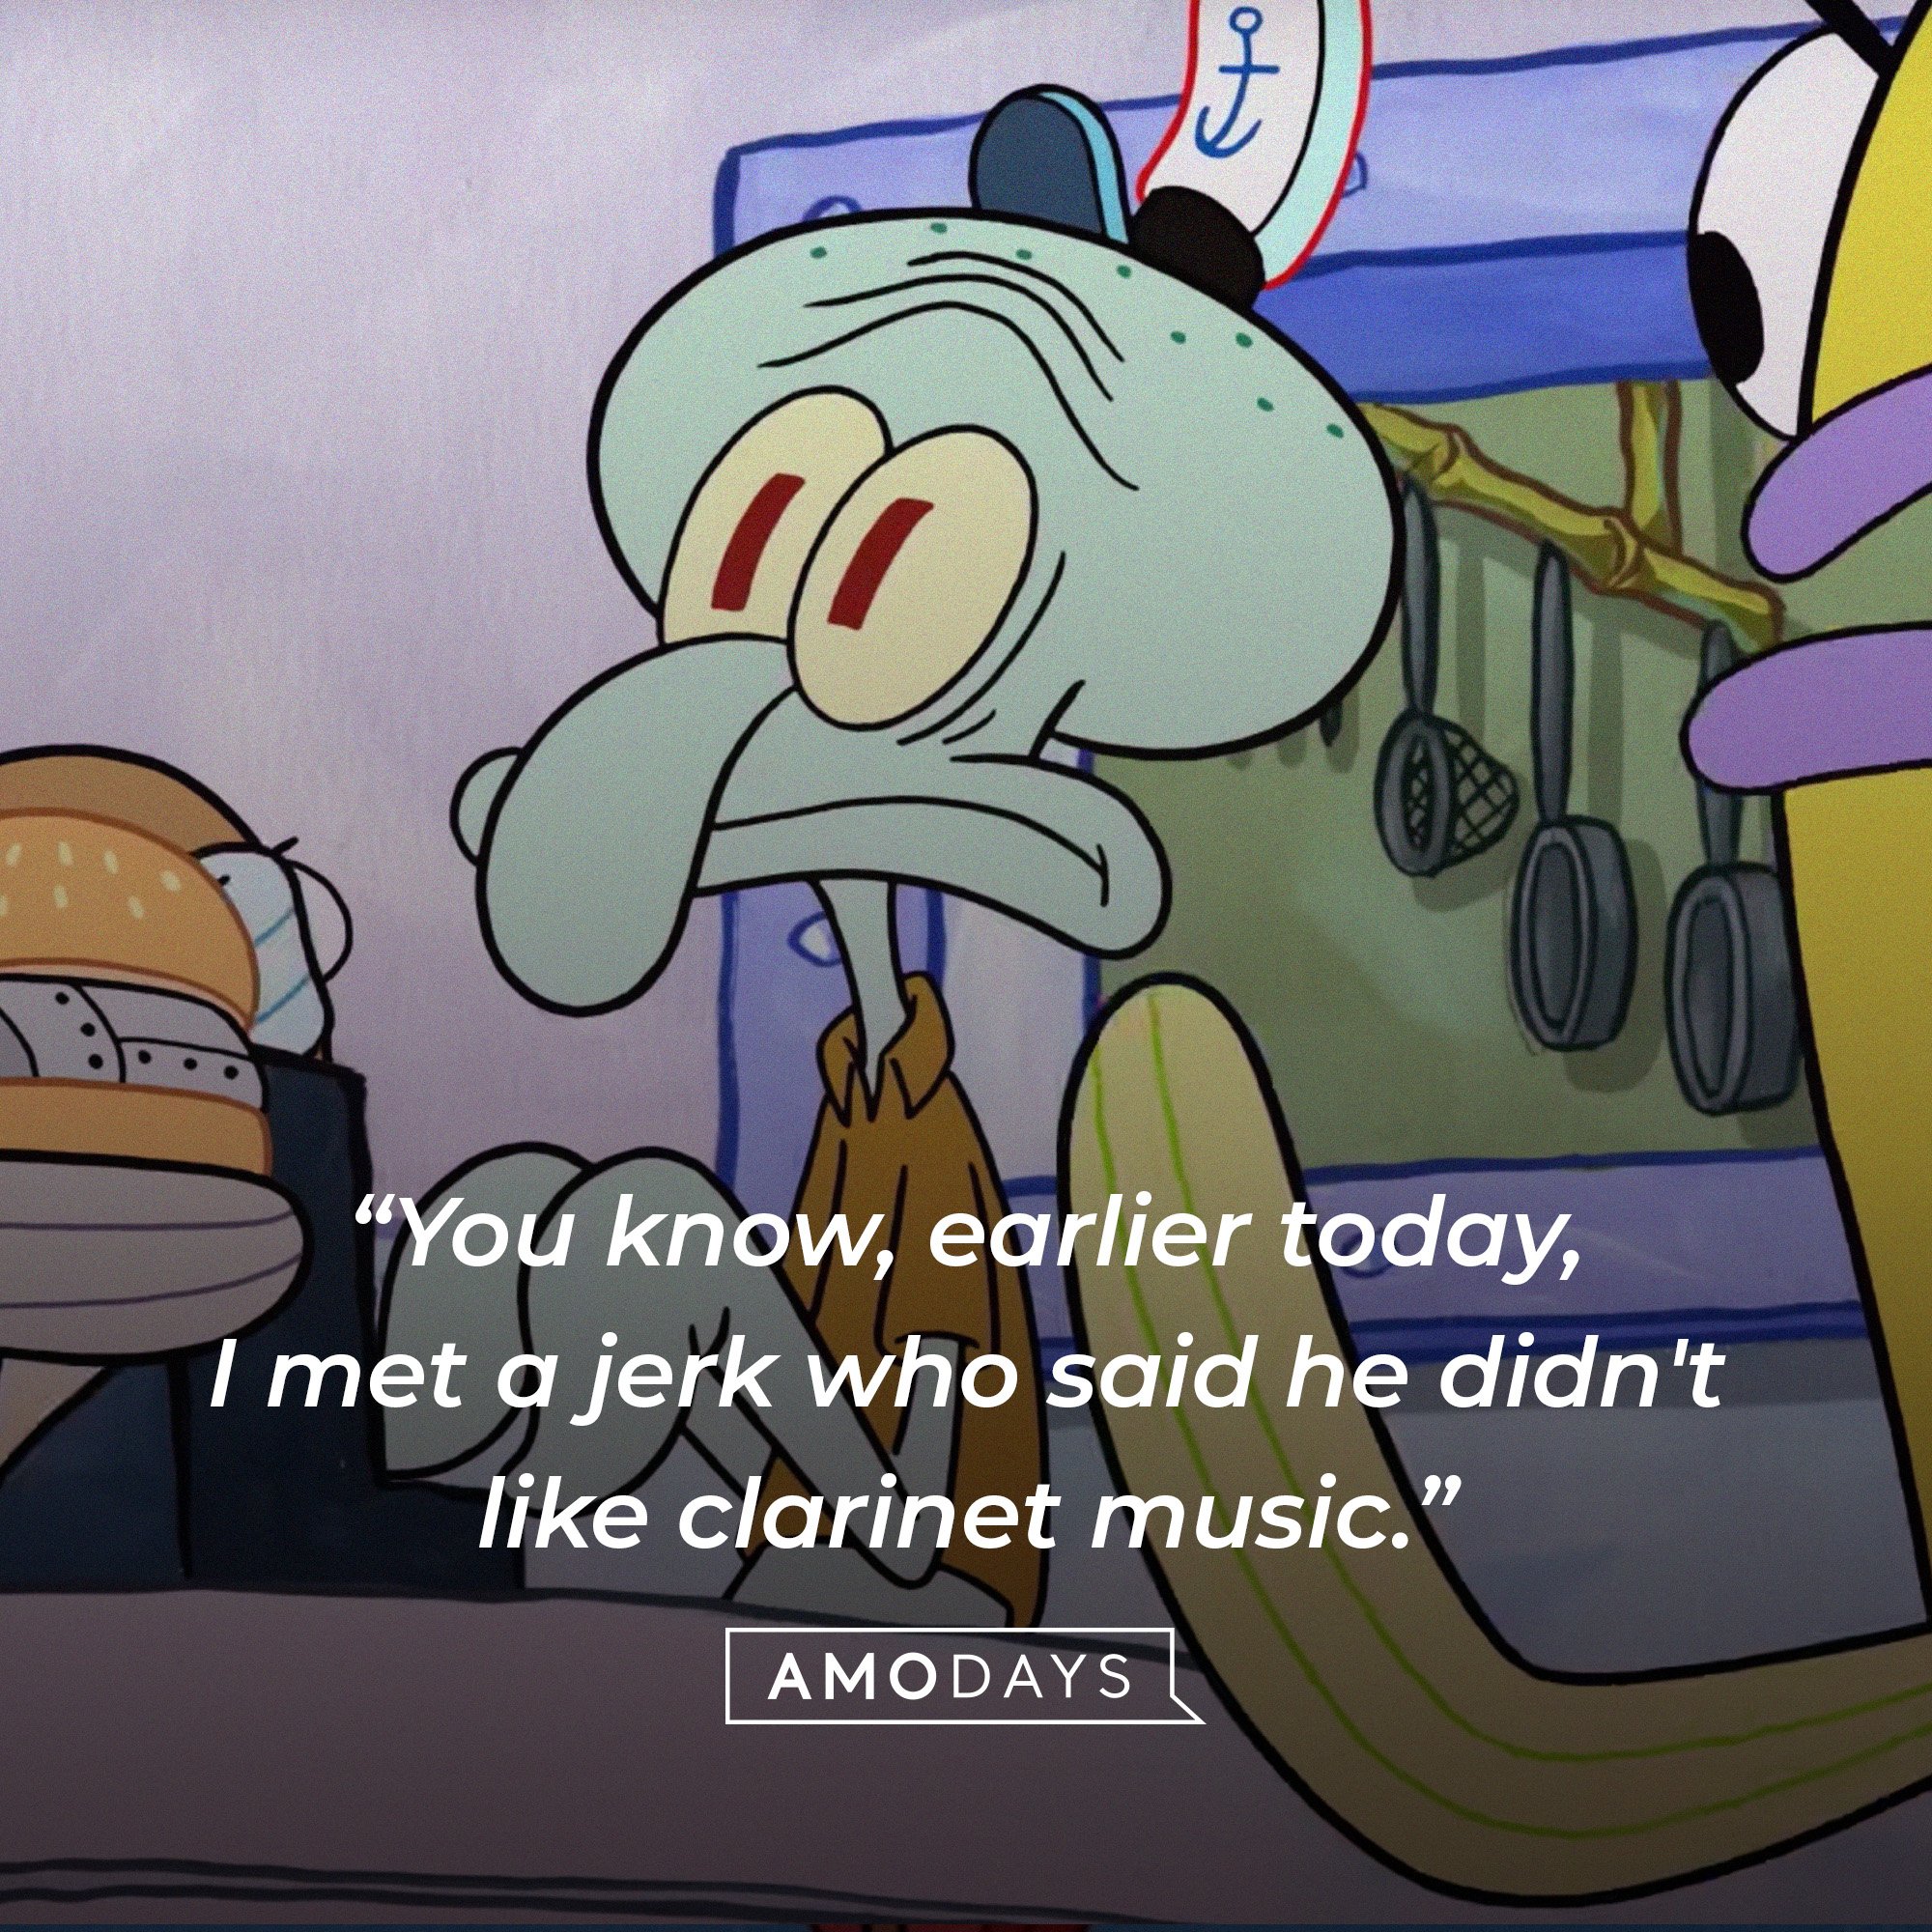 Squidward Tentacles’ quote: “You know, earlier today, I met a jerk who said he didn't like clarinet music” | Source: AmoDays